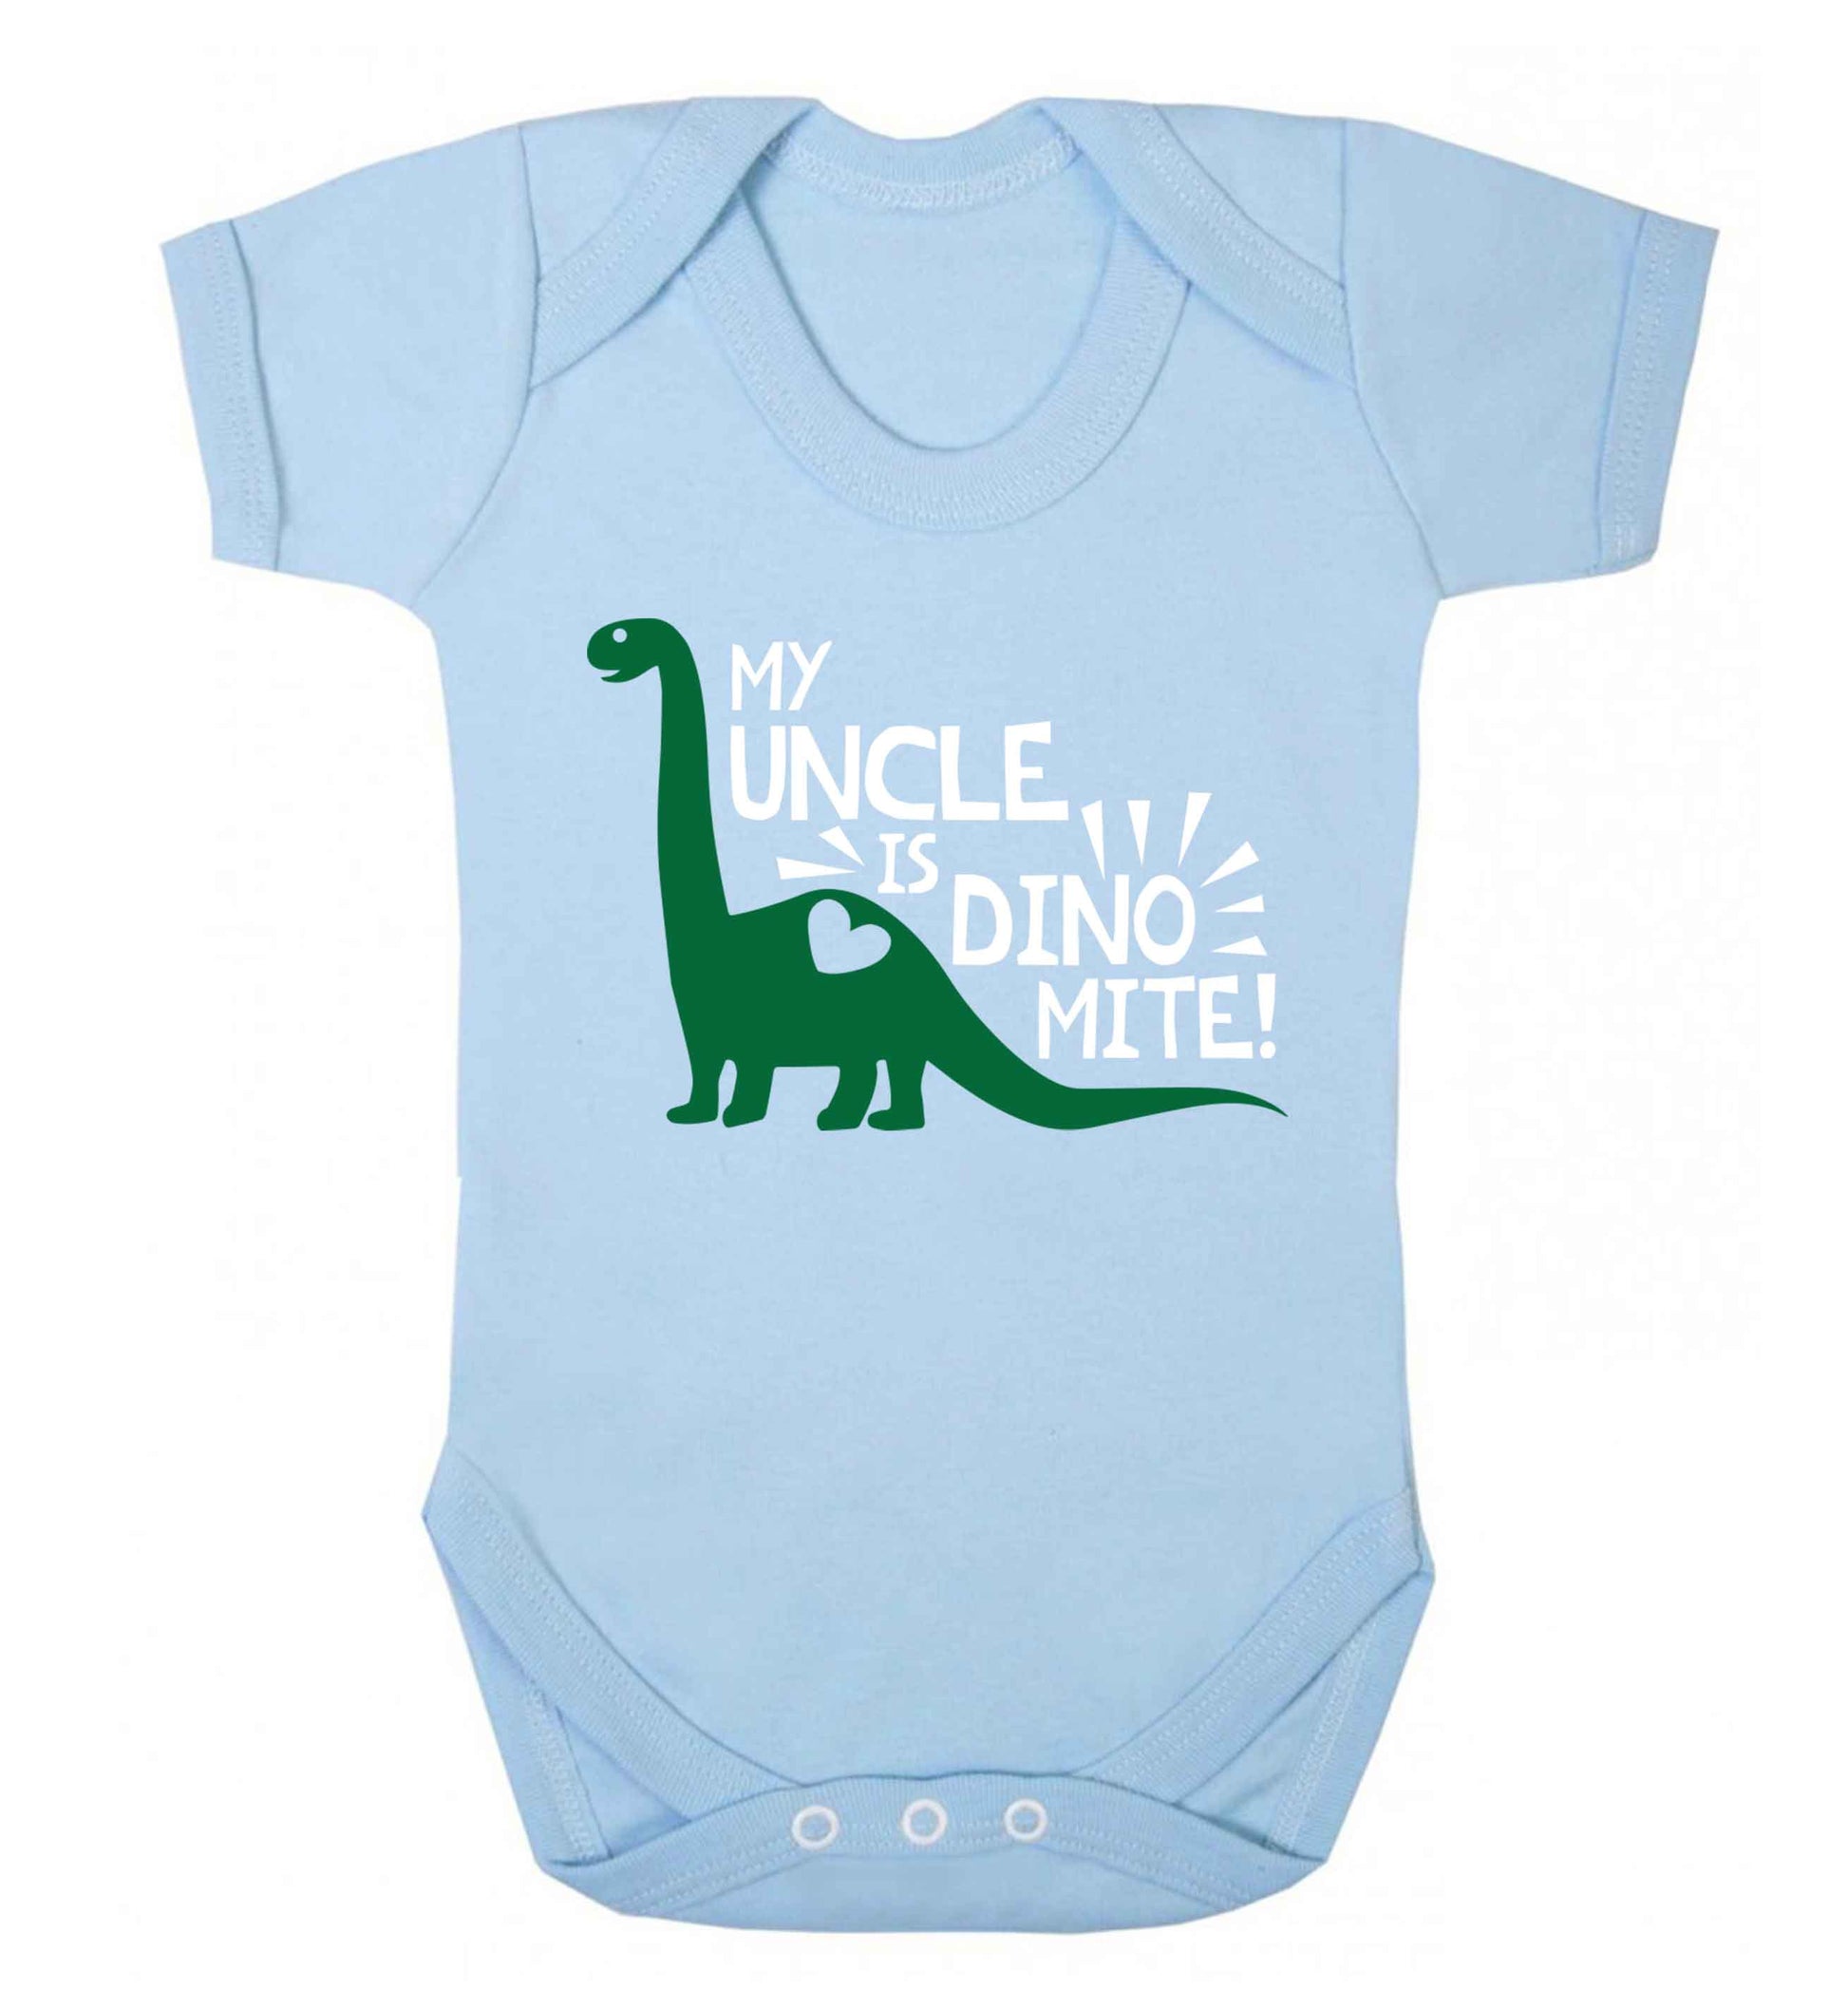 My uncle is dinomite! Baby Vest pale blue 18-24 months